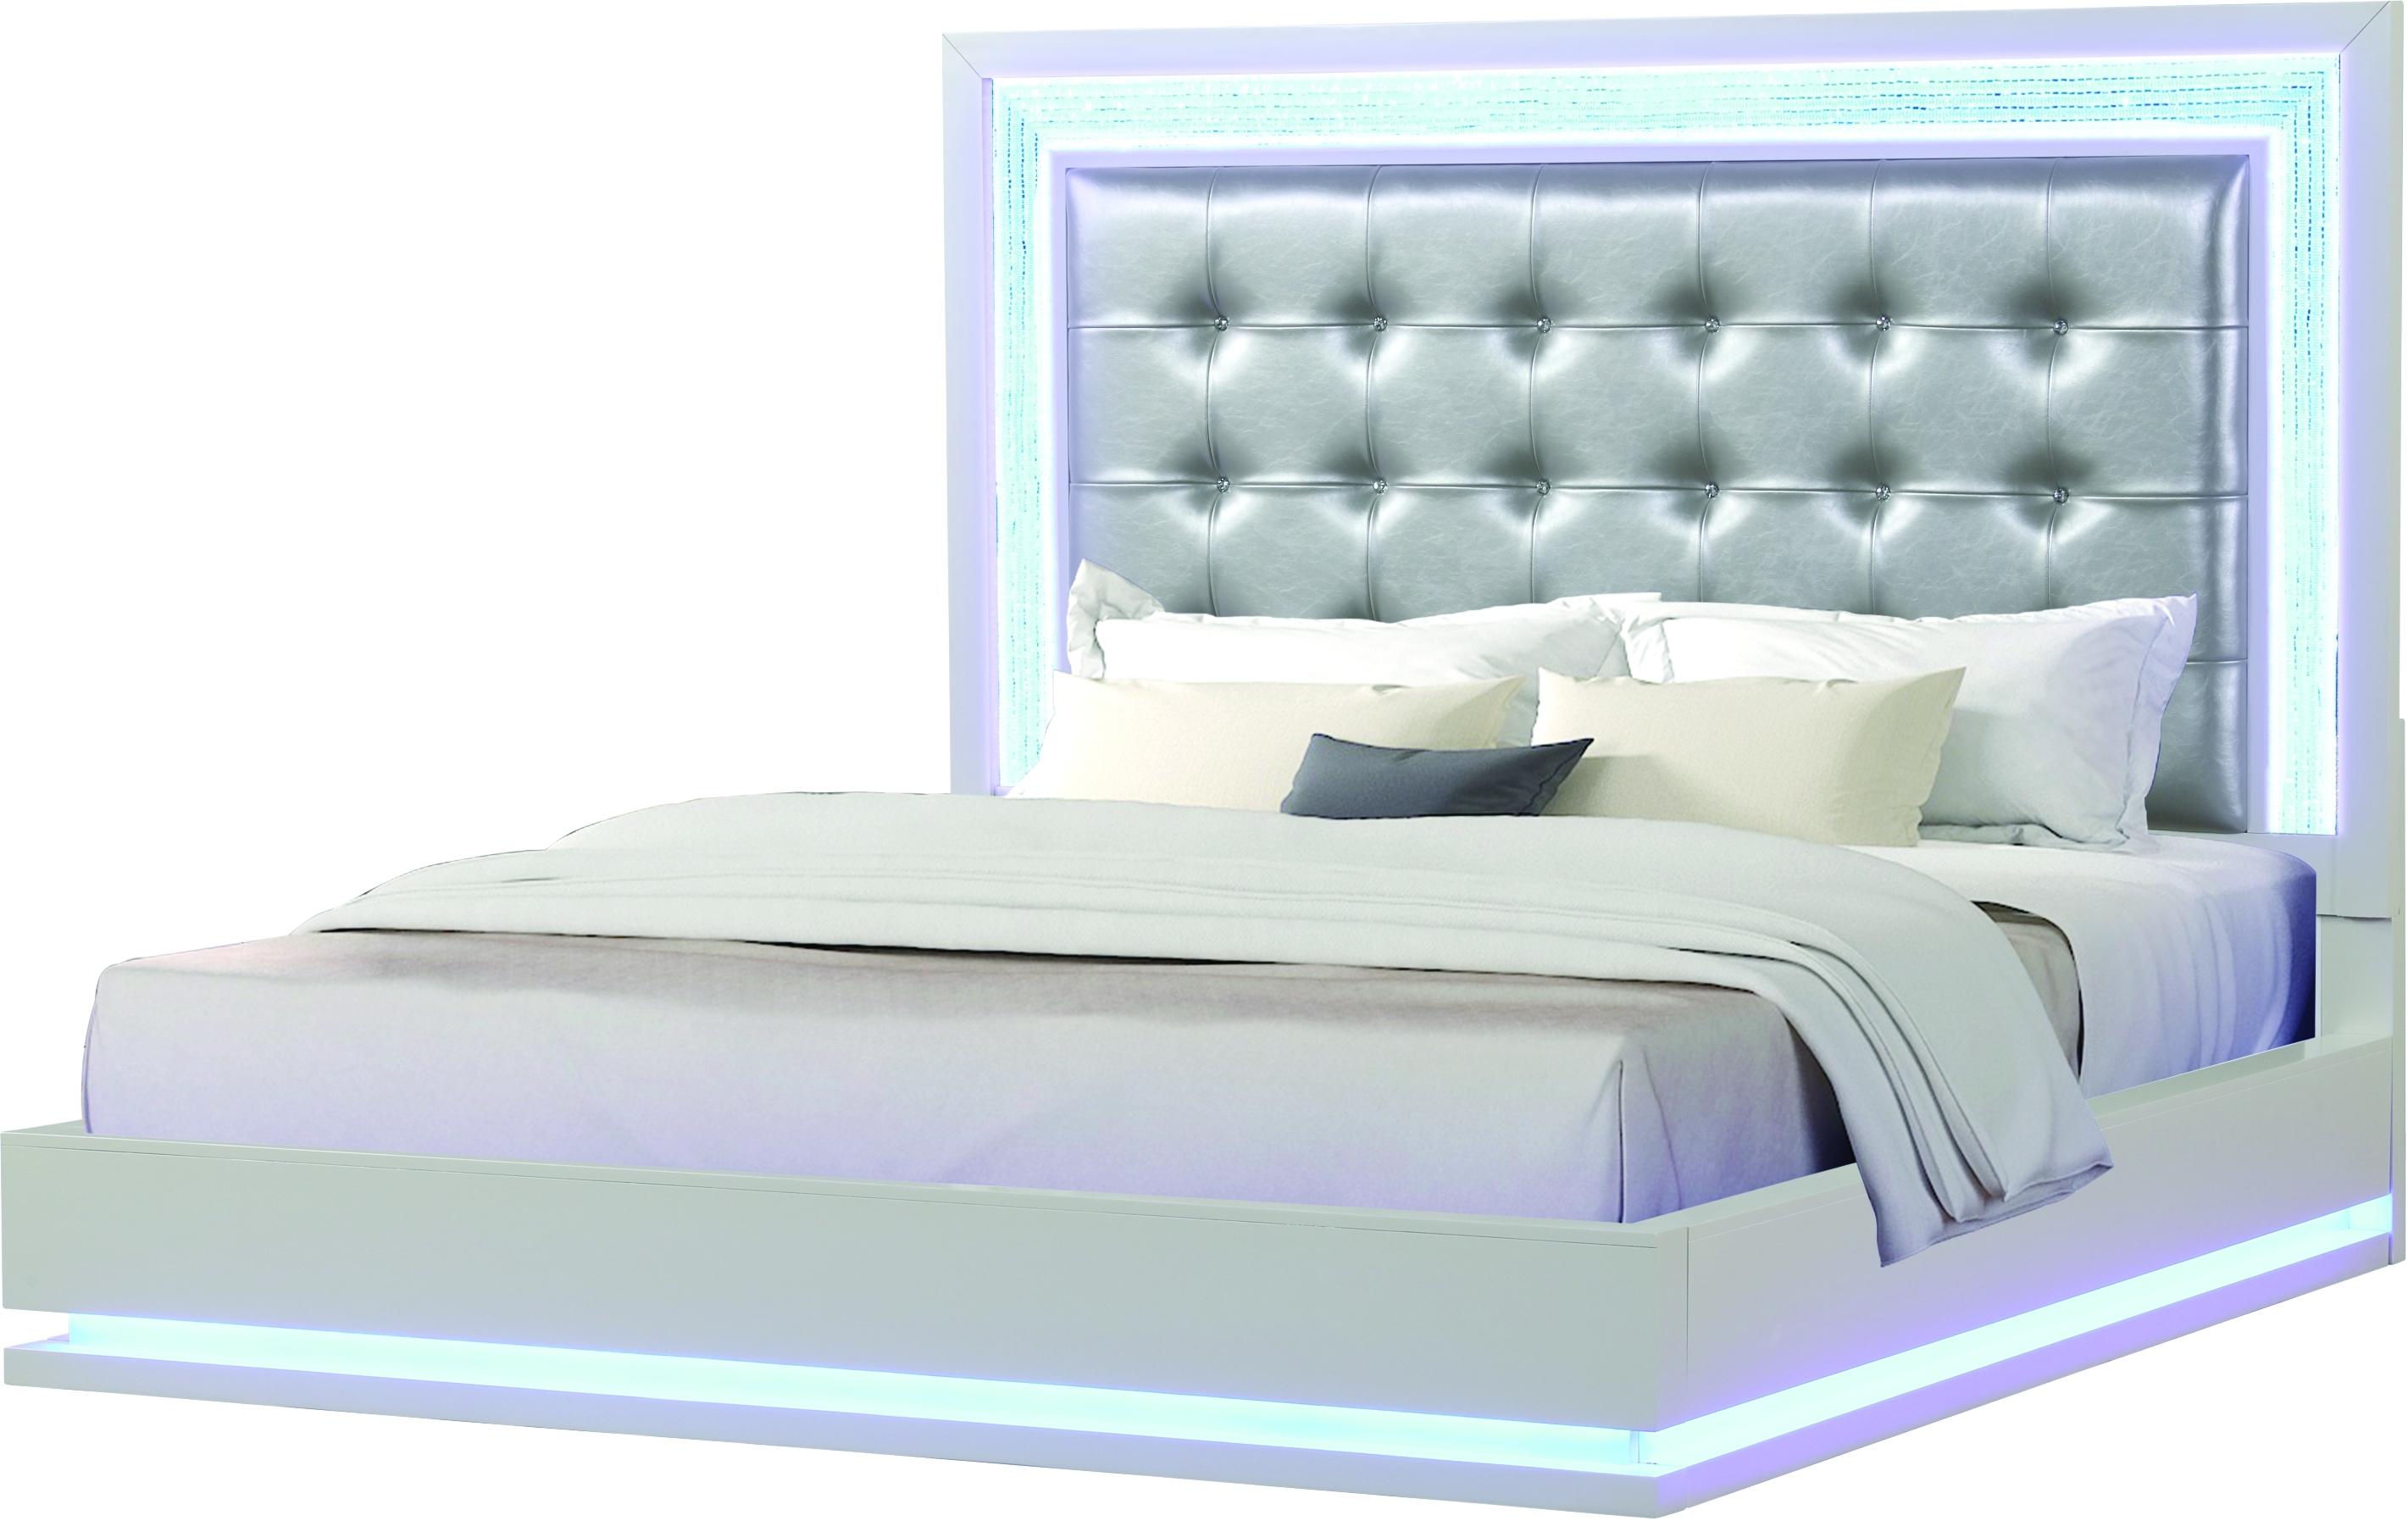 

    
Milky White Tufted Queen Led Bed PASSION Galaxy Home Contemporary Modern
